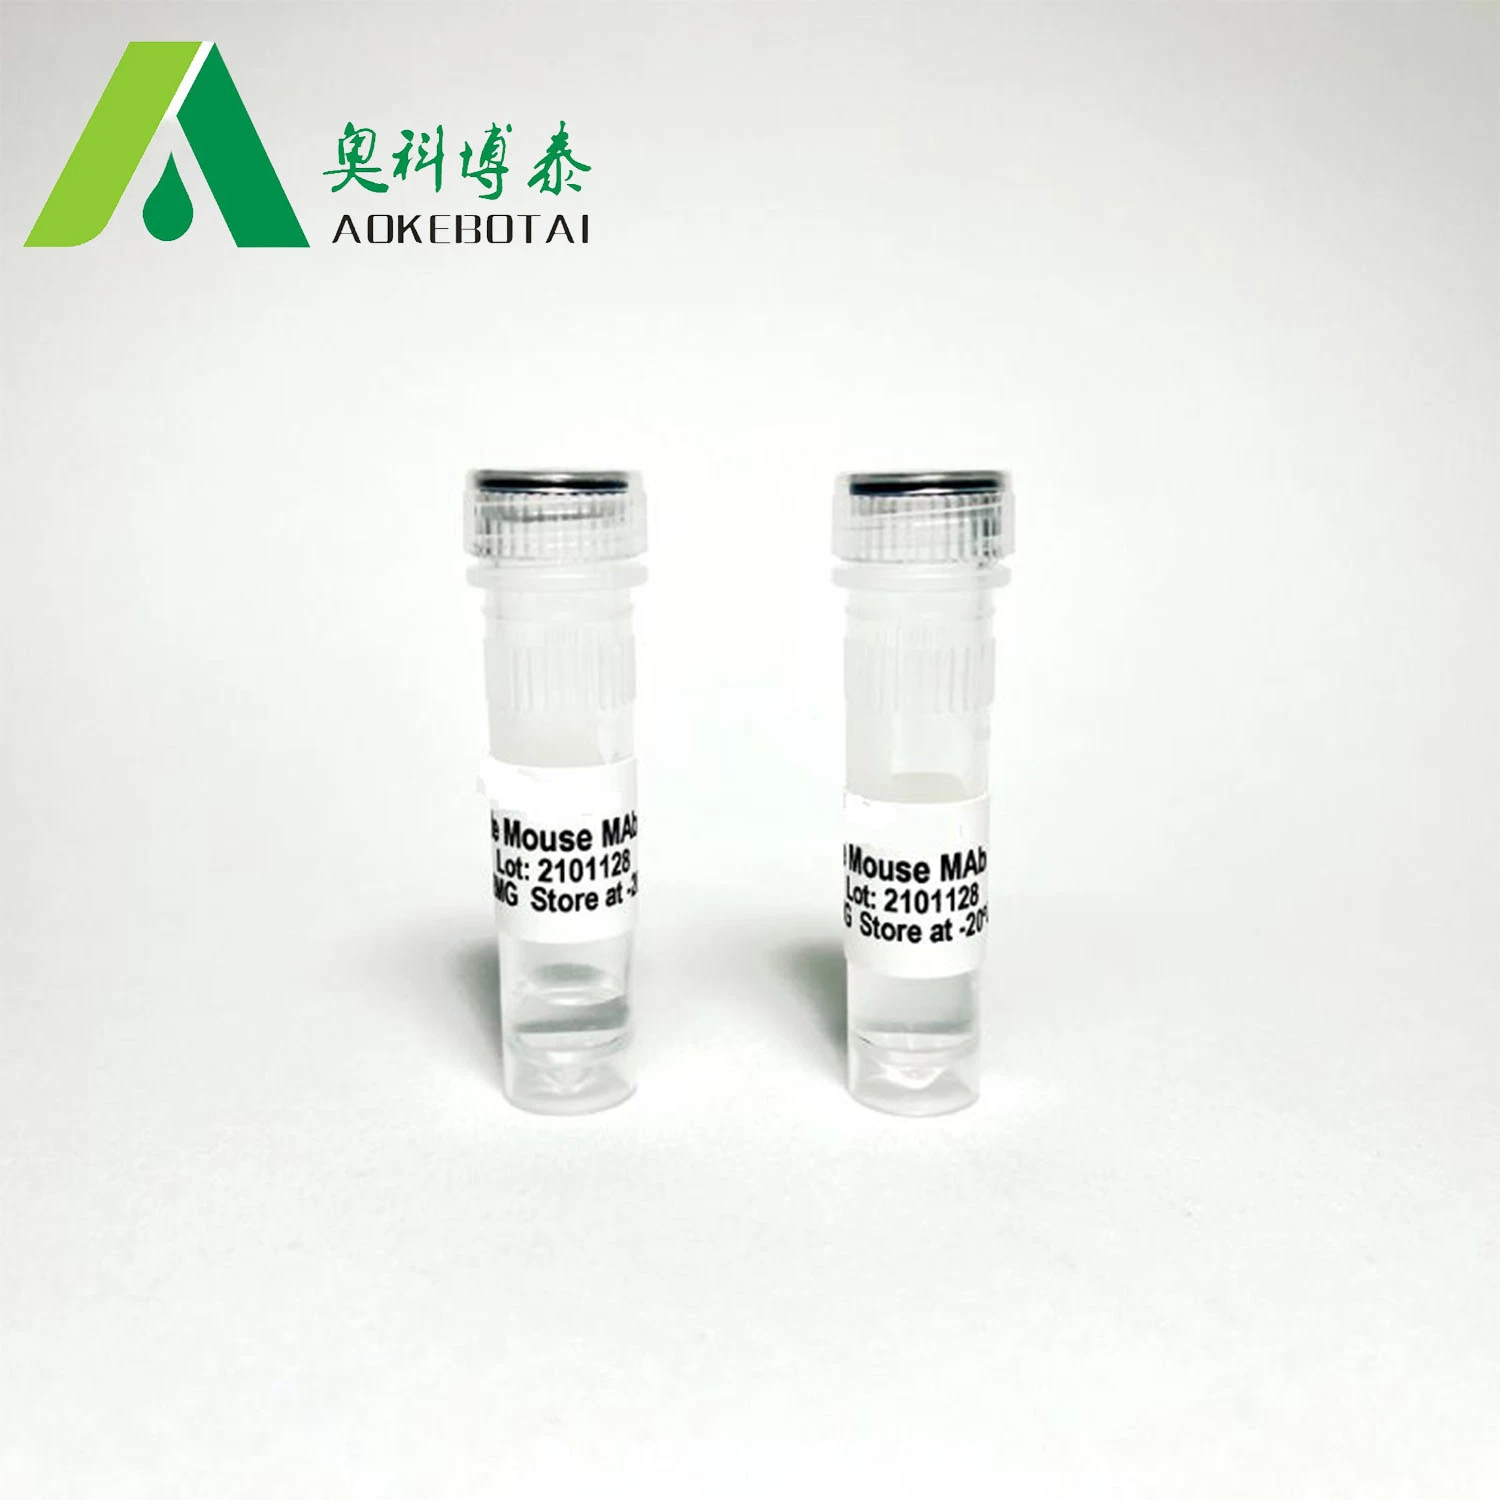 Best antipairs of Interleukin-6 Antibody from aokebotai for your test kits